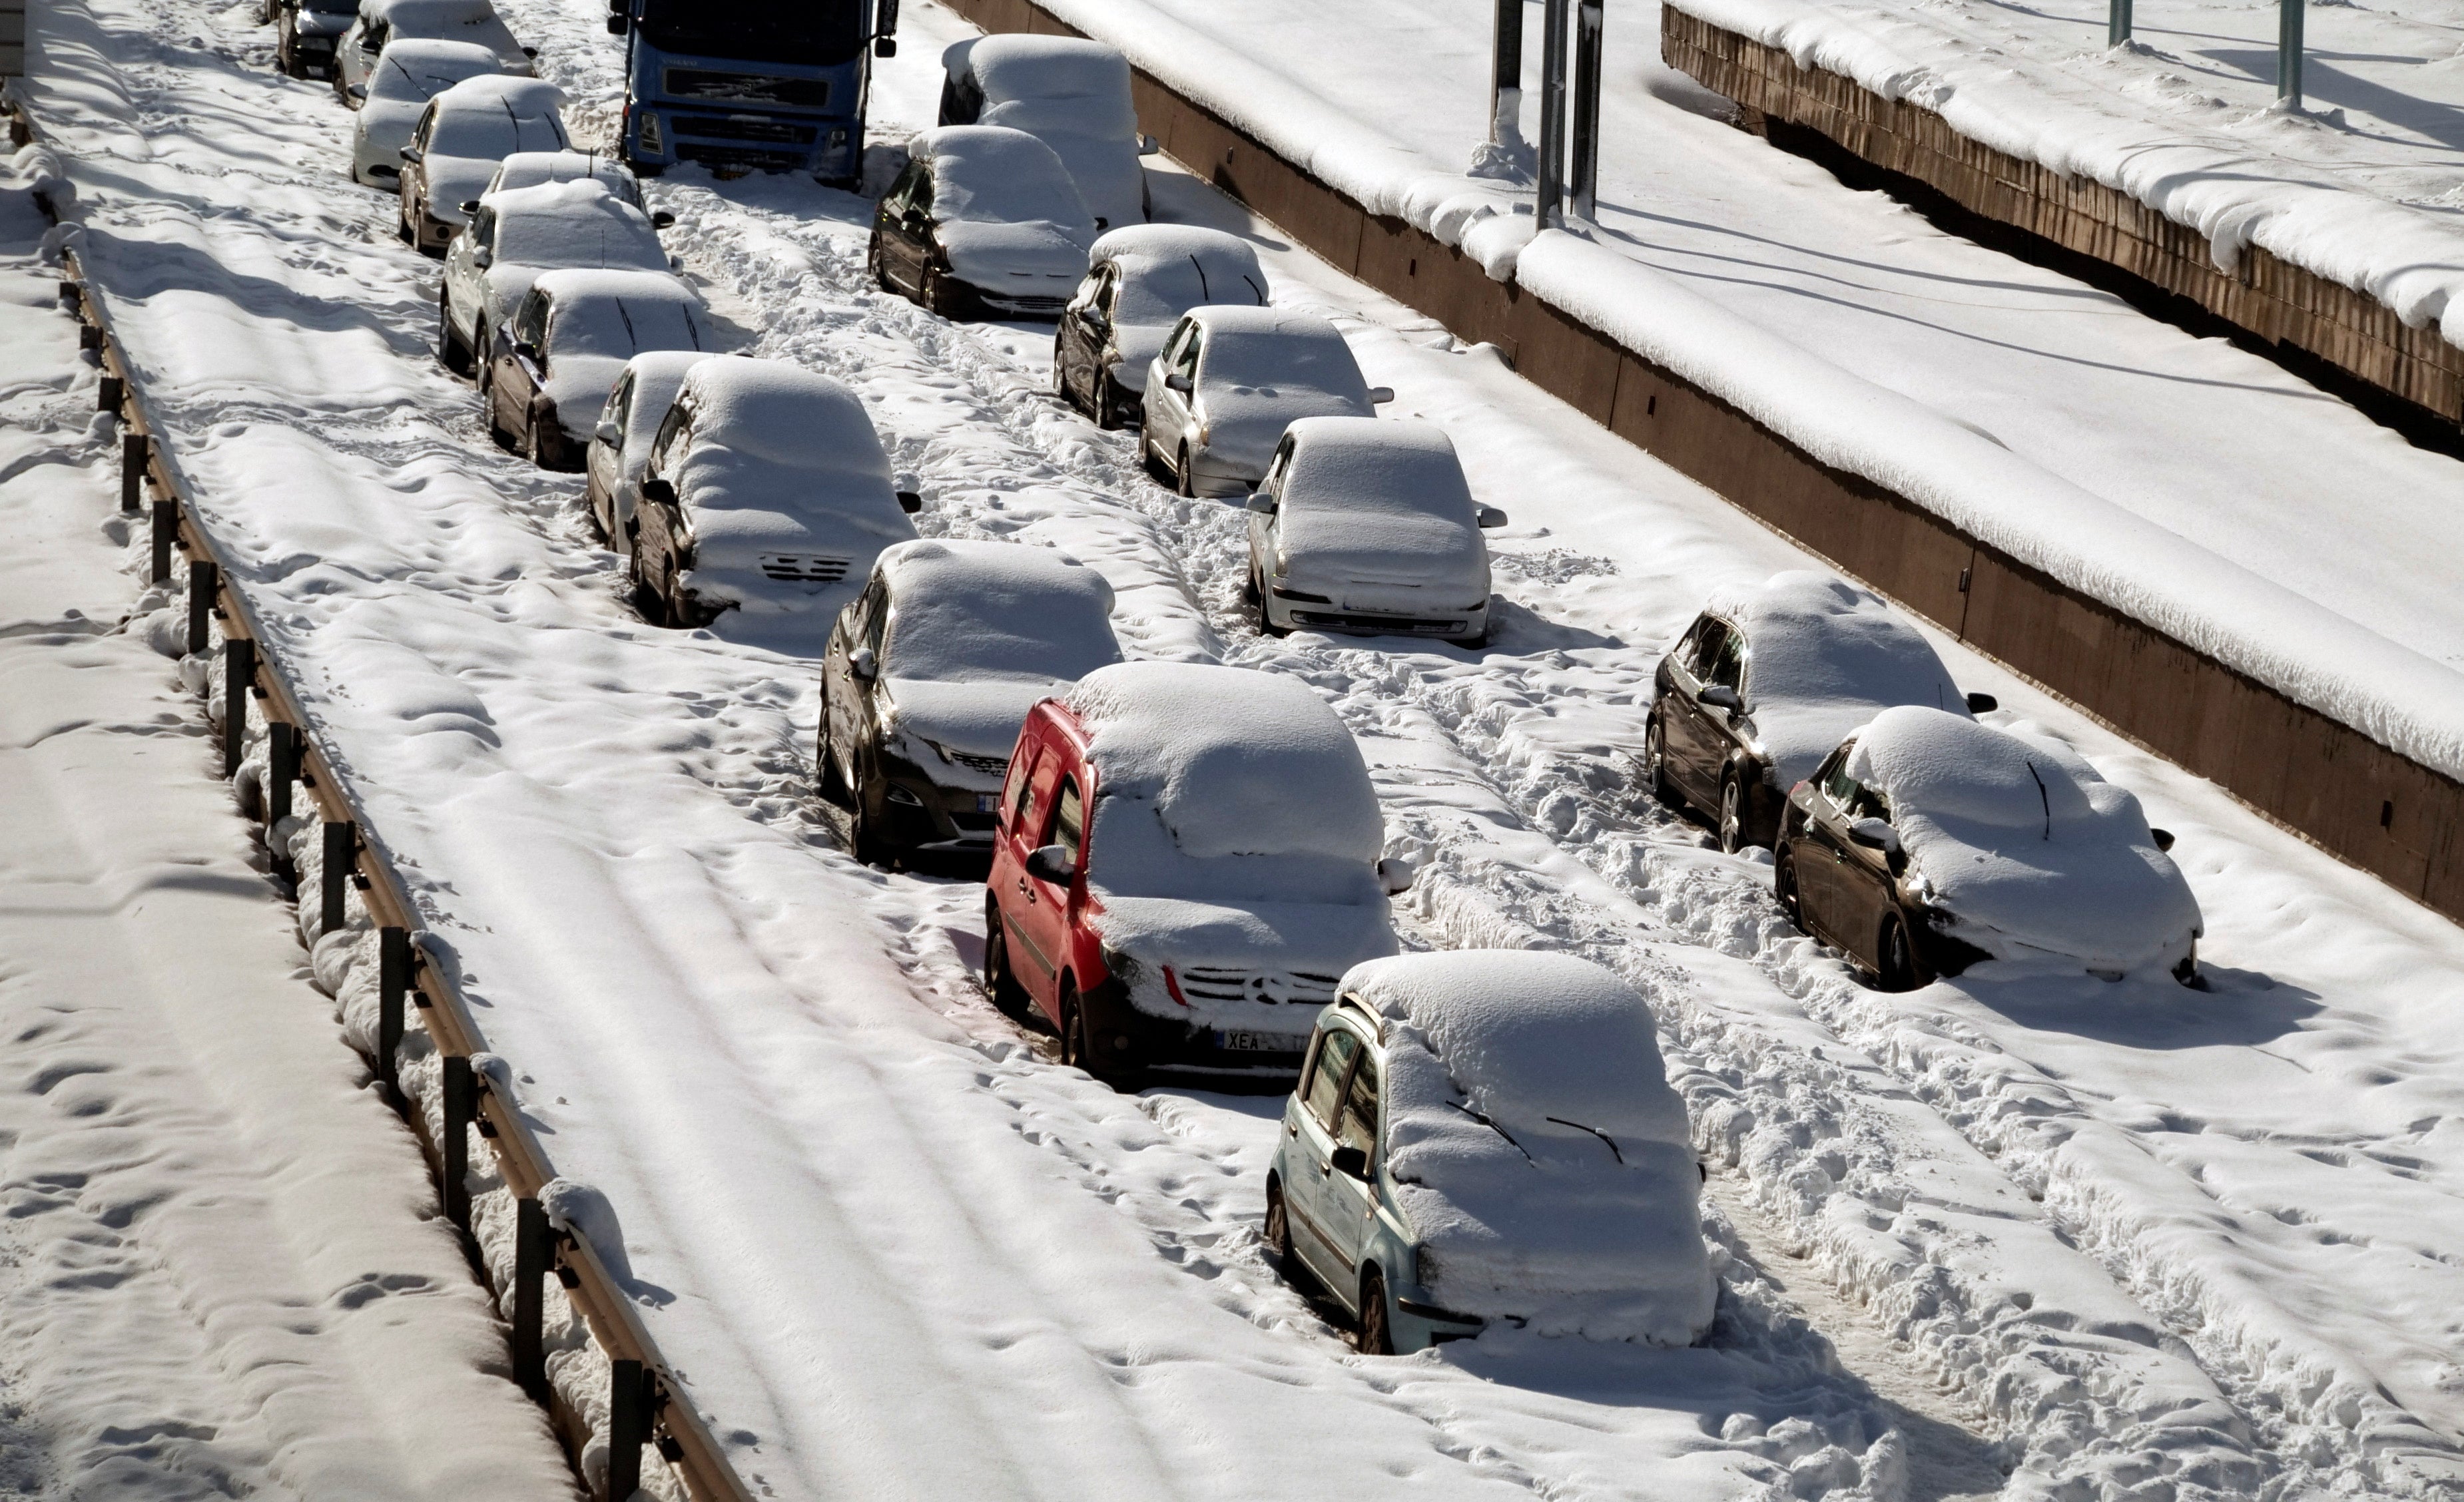 Abandoned vehicles are covered in snow, following heavy snowfall in Athens